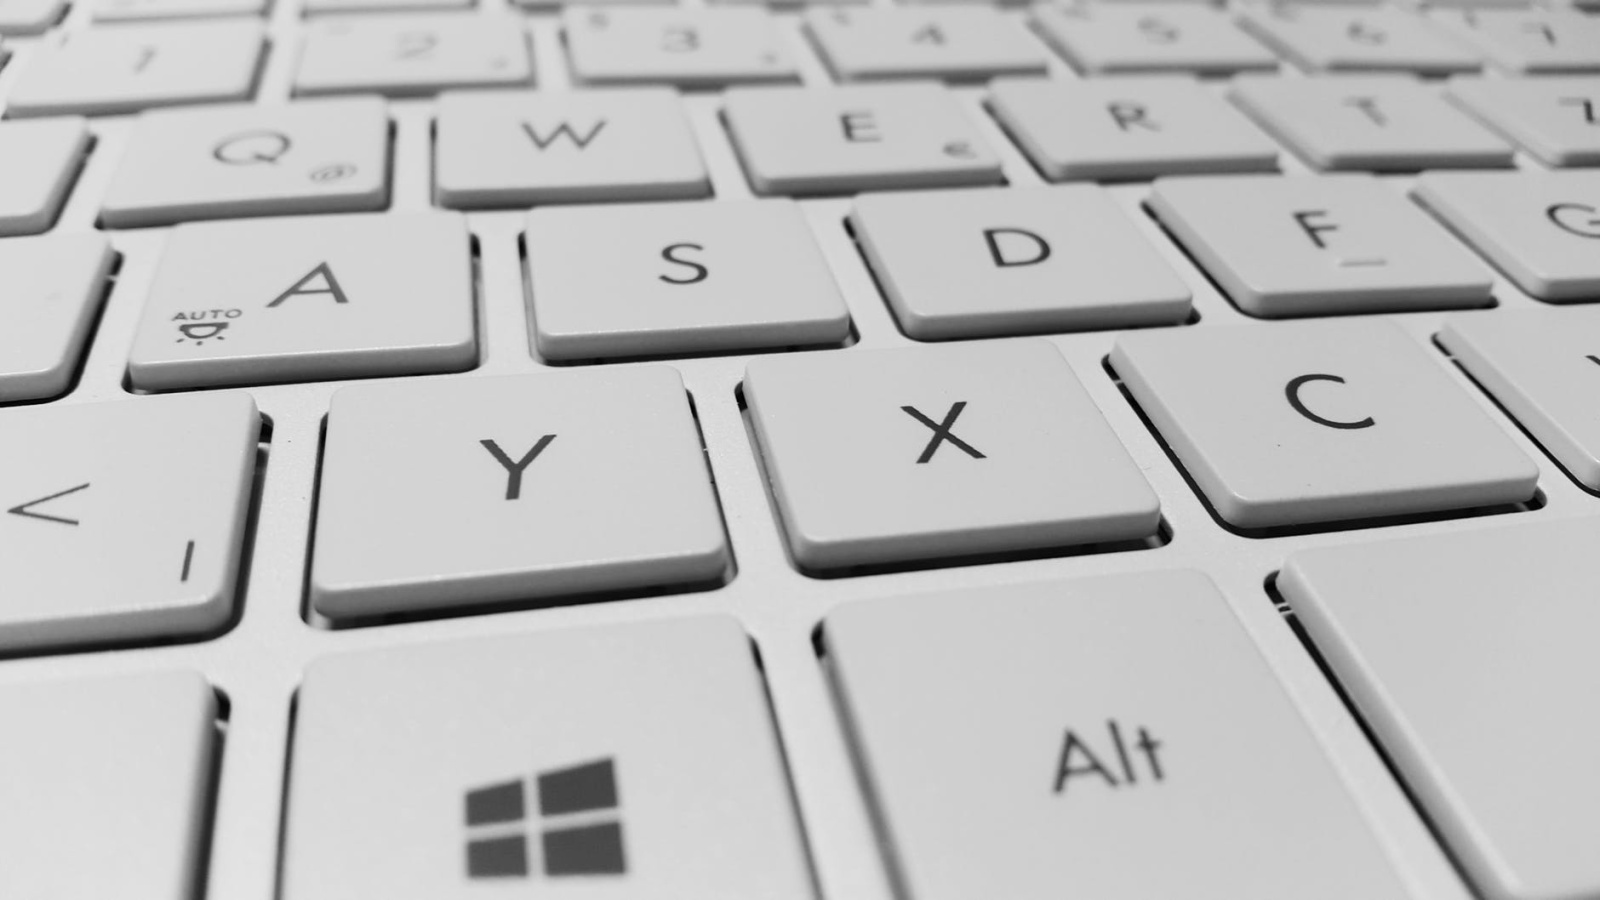 The most popular keyboard shortcuts for searching and filtering in Business Central